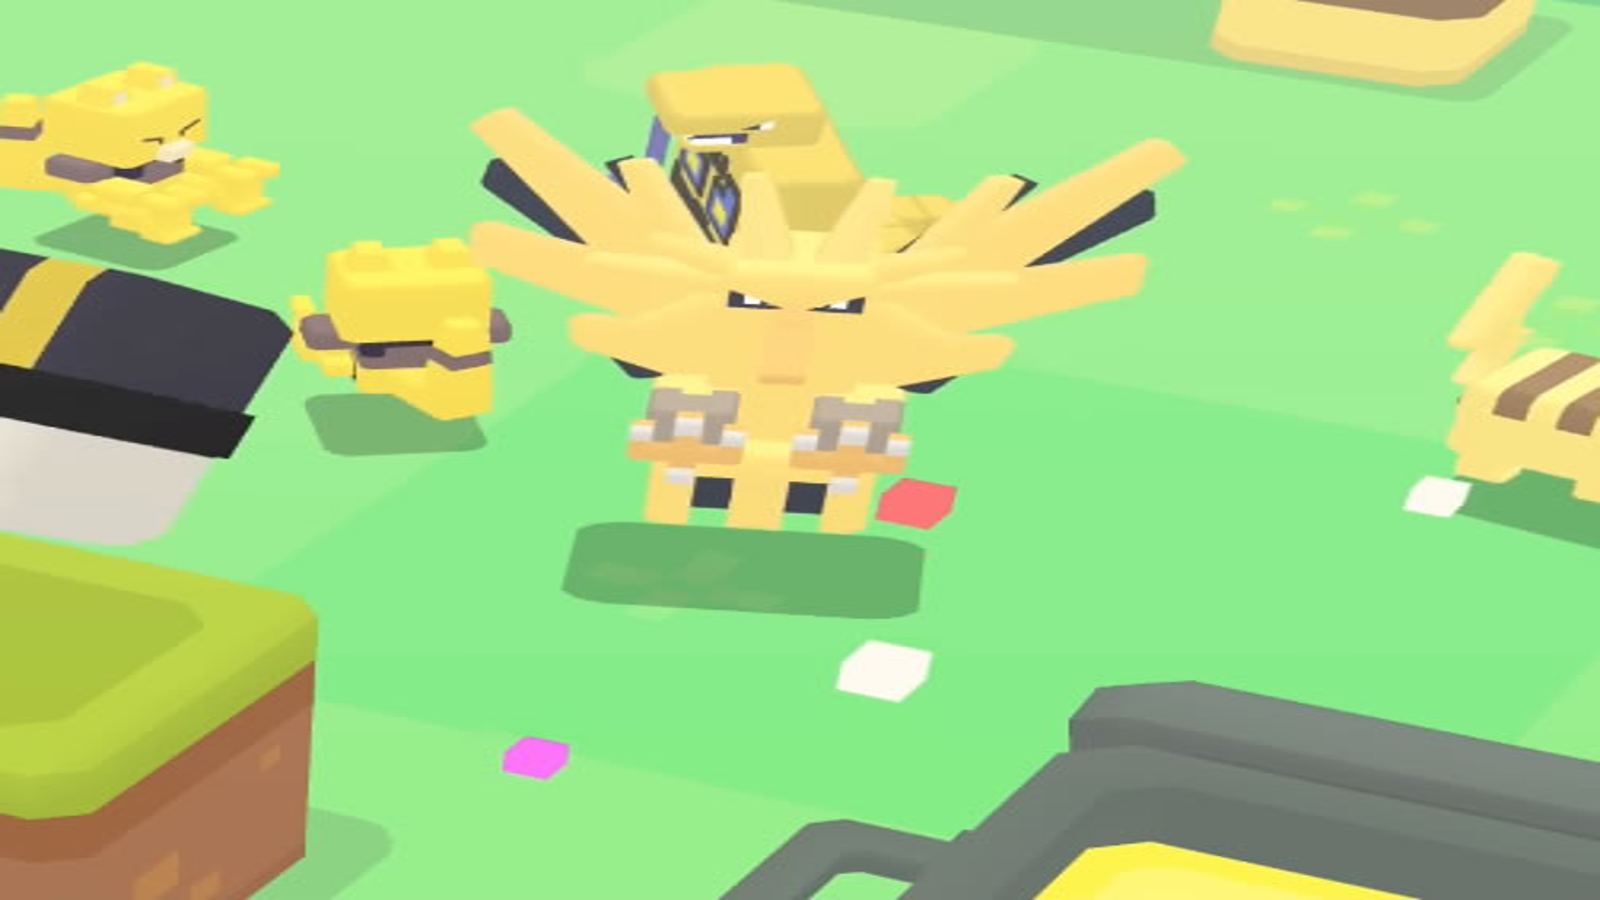 Pokémon Quest cheats and tips - Everything you need to get started